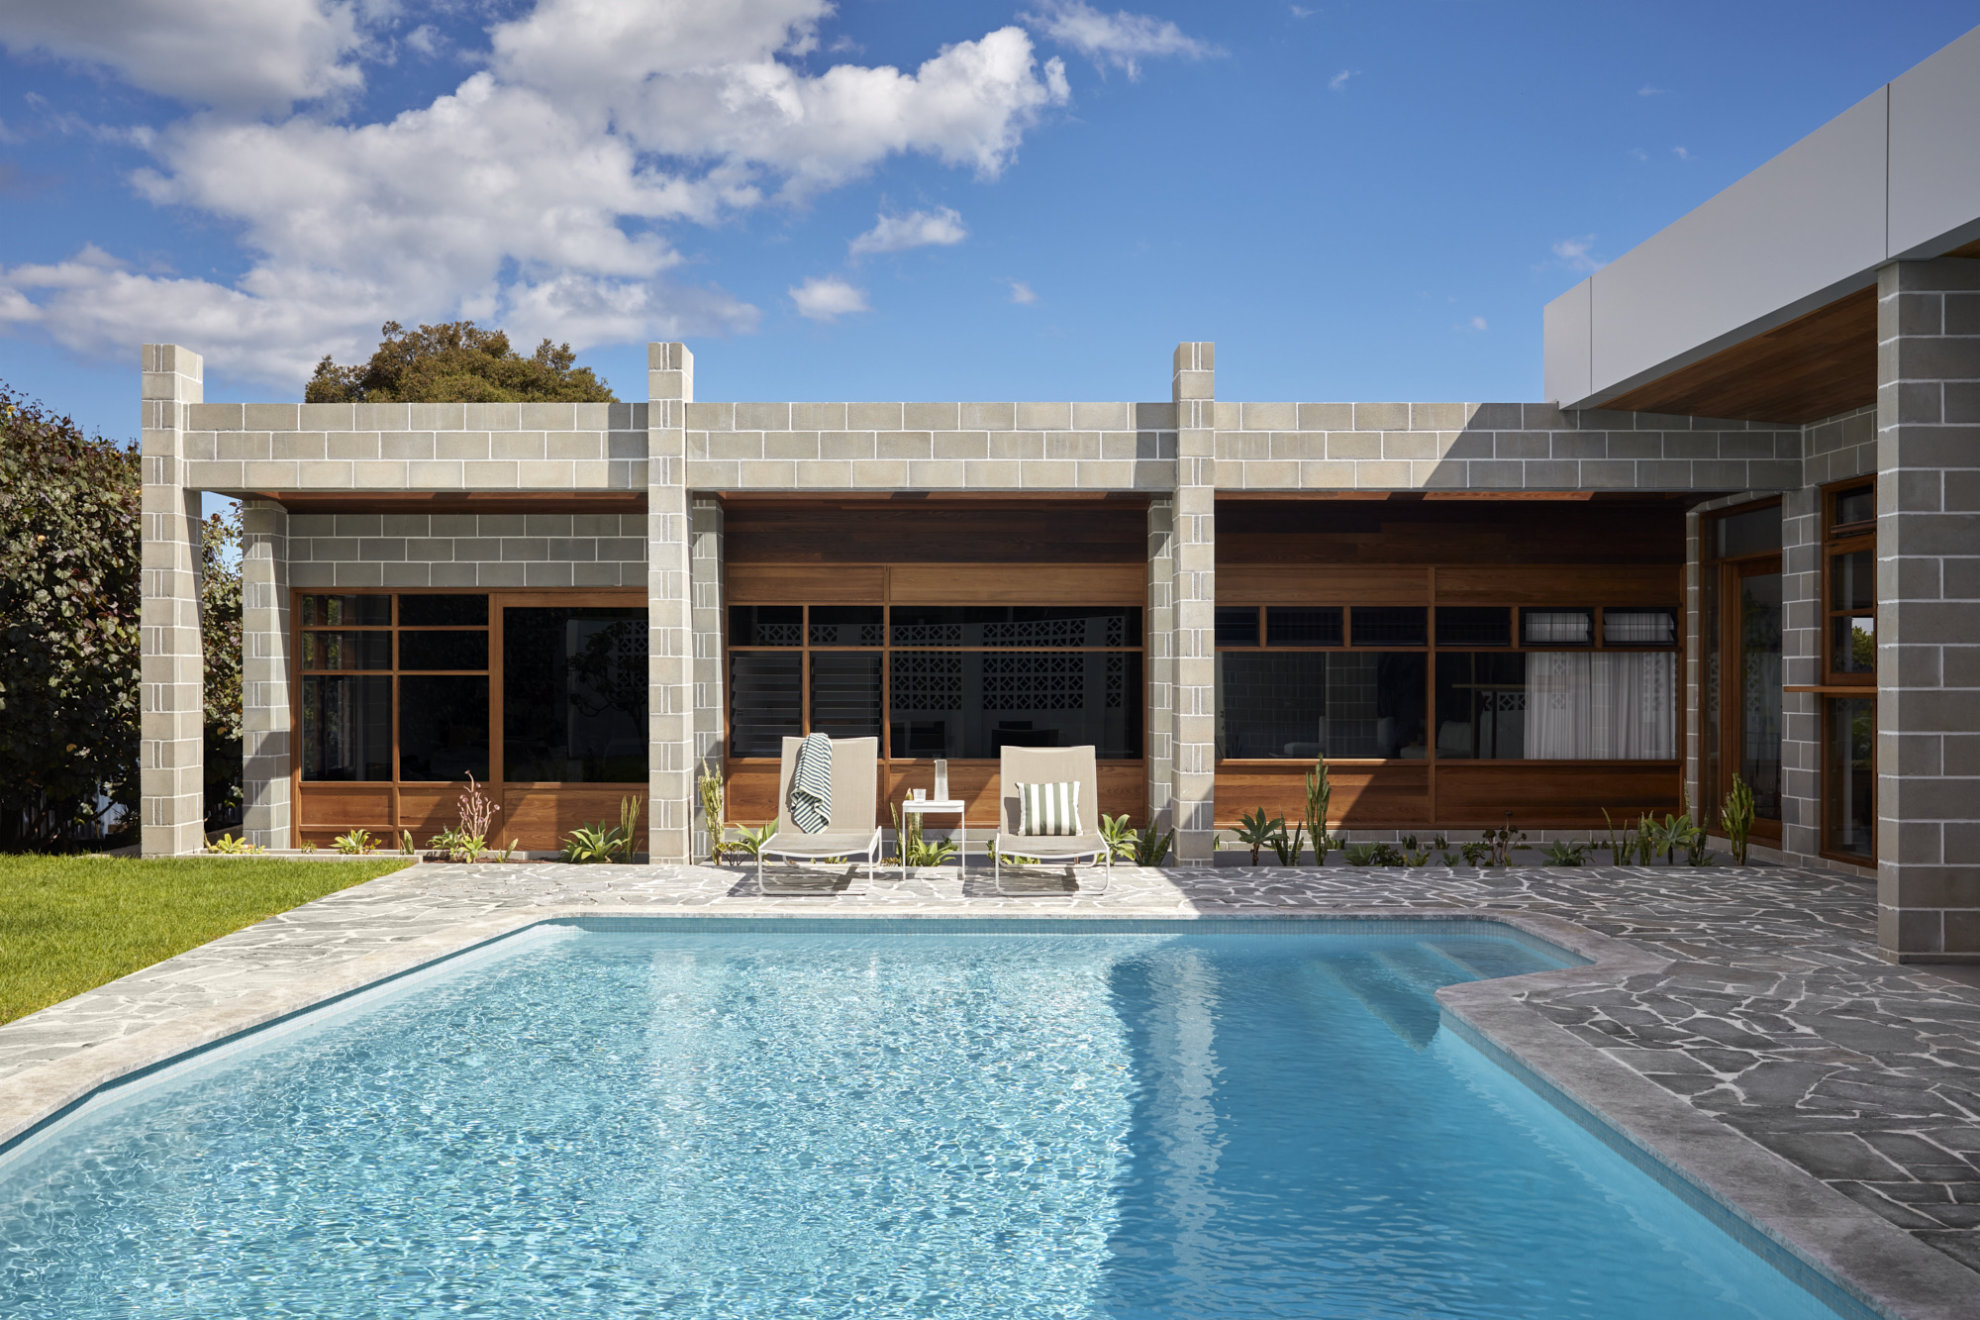 A sunlit pool in front of a single-storey Modernist house built with large concrete blocks. The entire visible facade of the house is lined with large glass windows framed with wood.